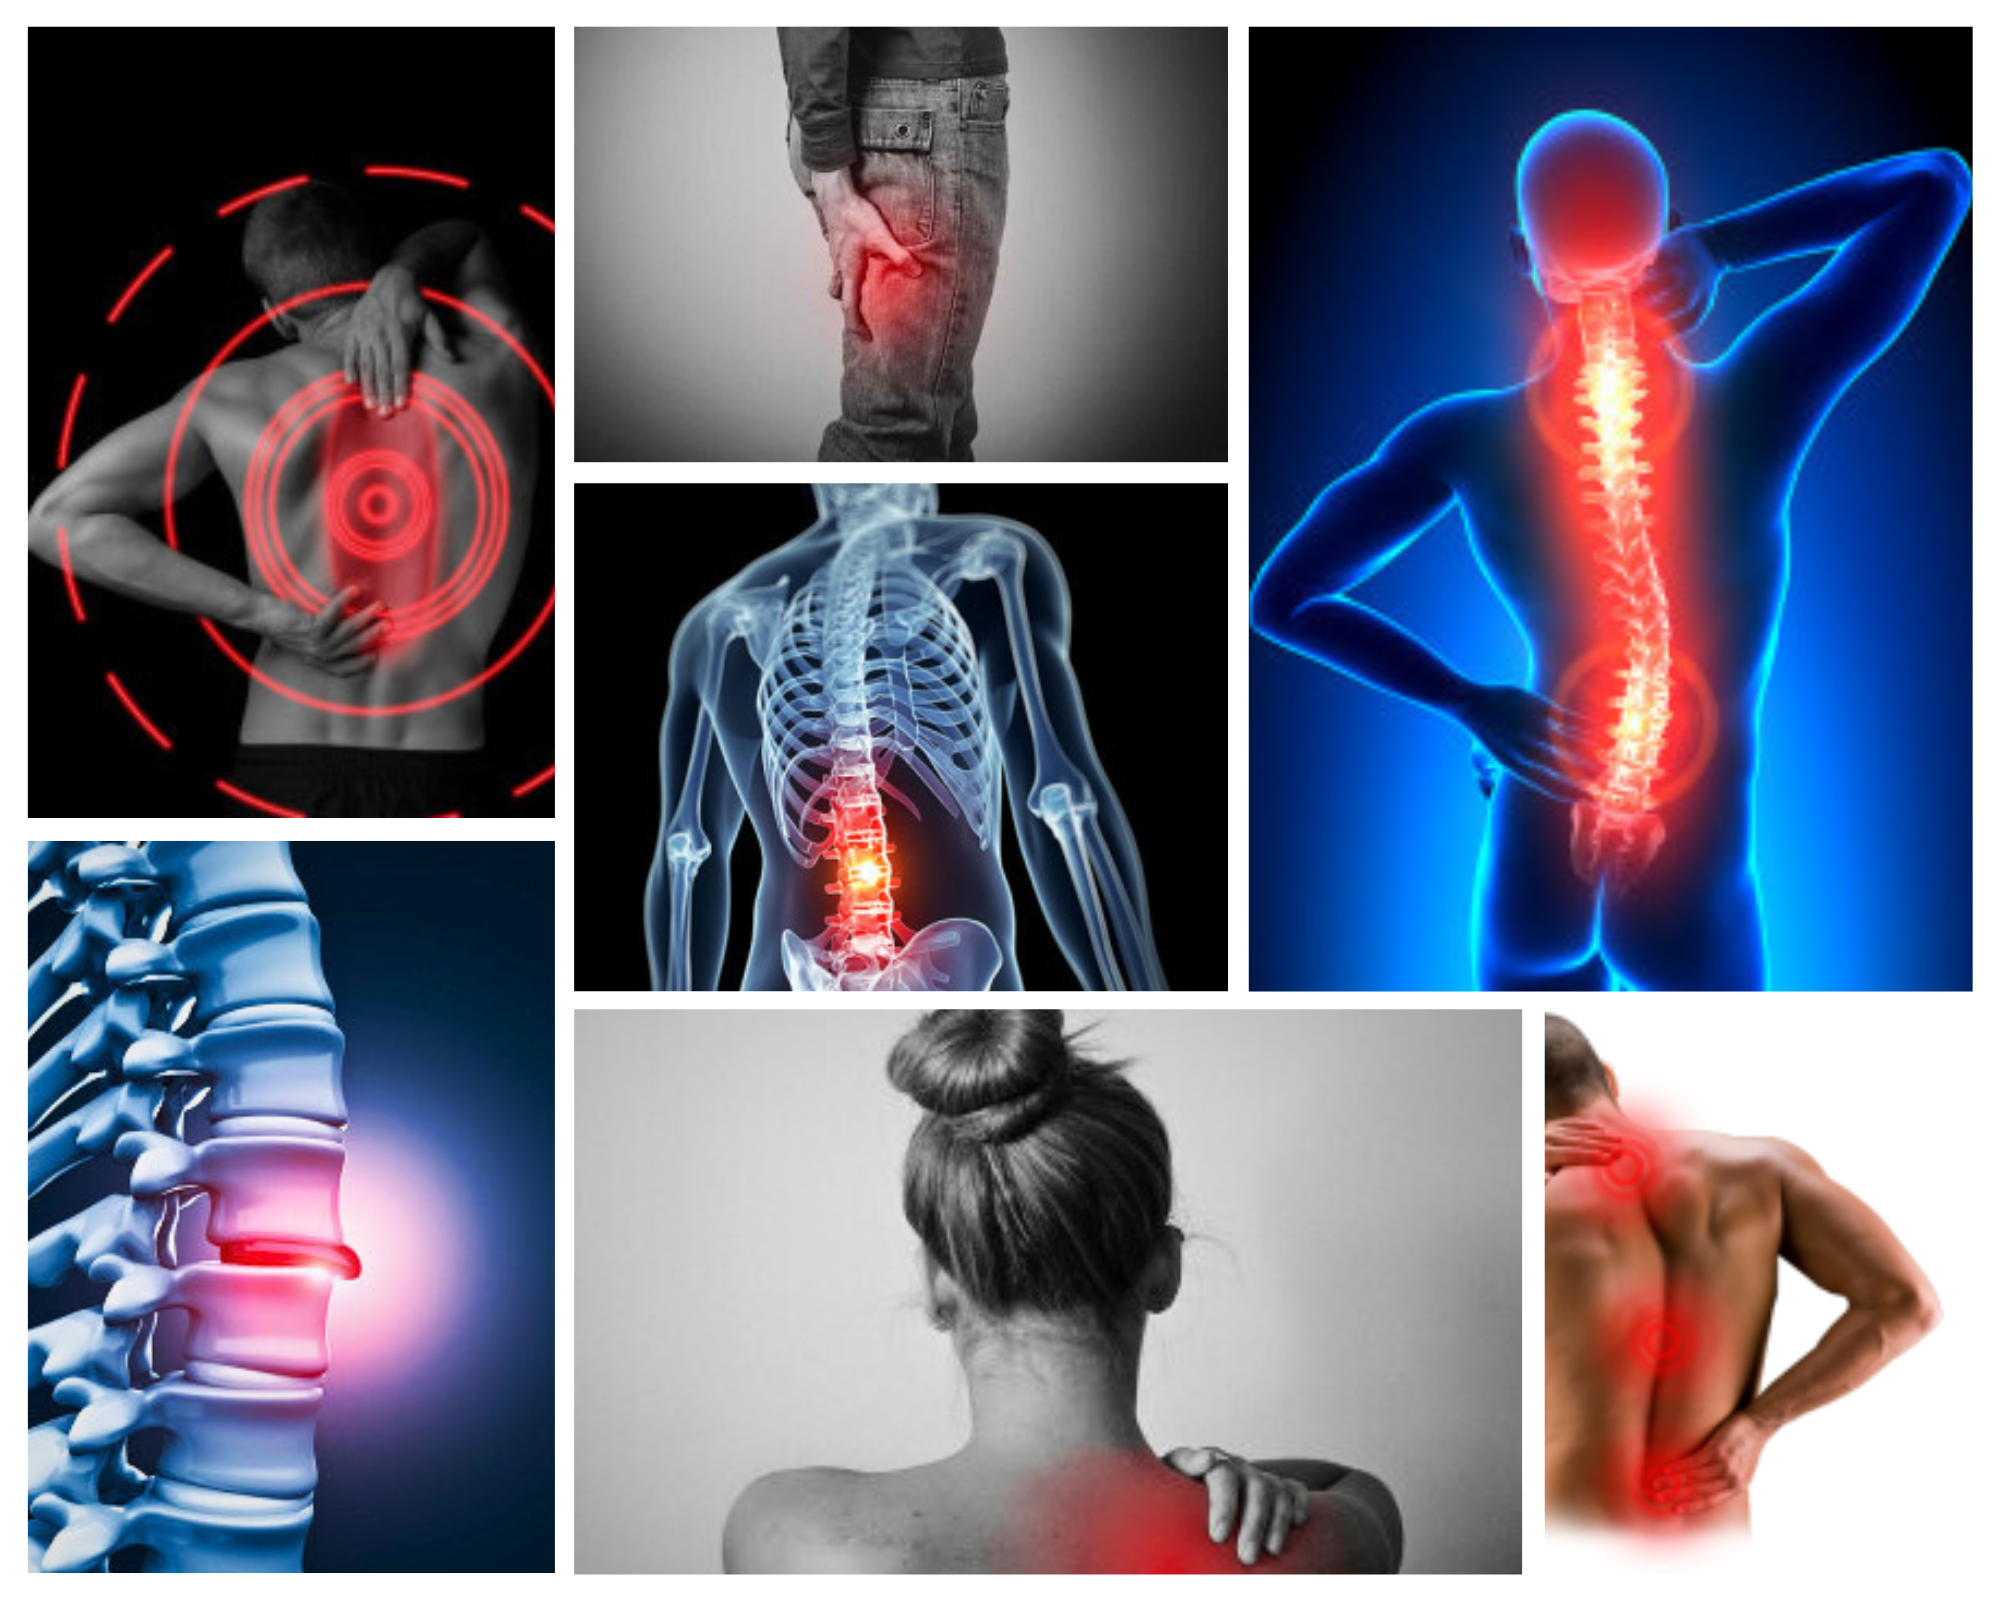 Stone Mountain Chiropractor for pain, injury, auto accidents, wellness and relief